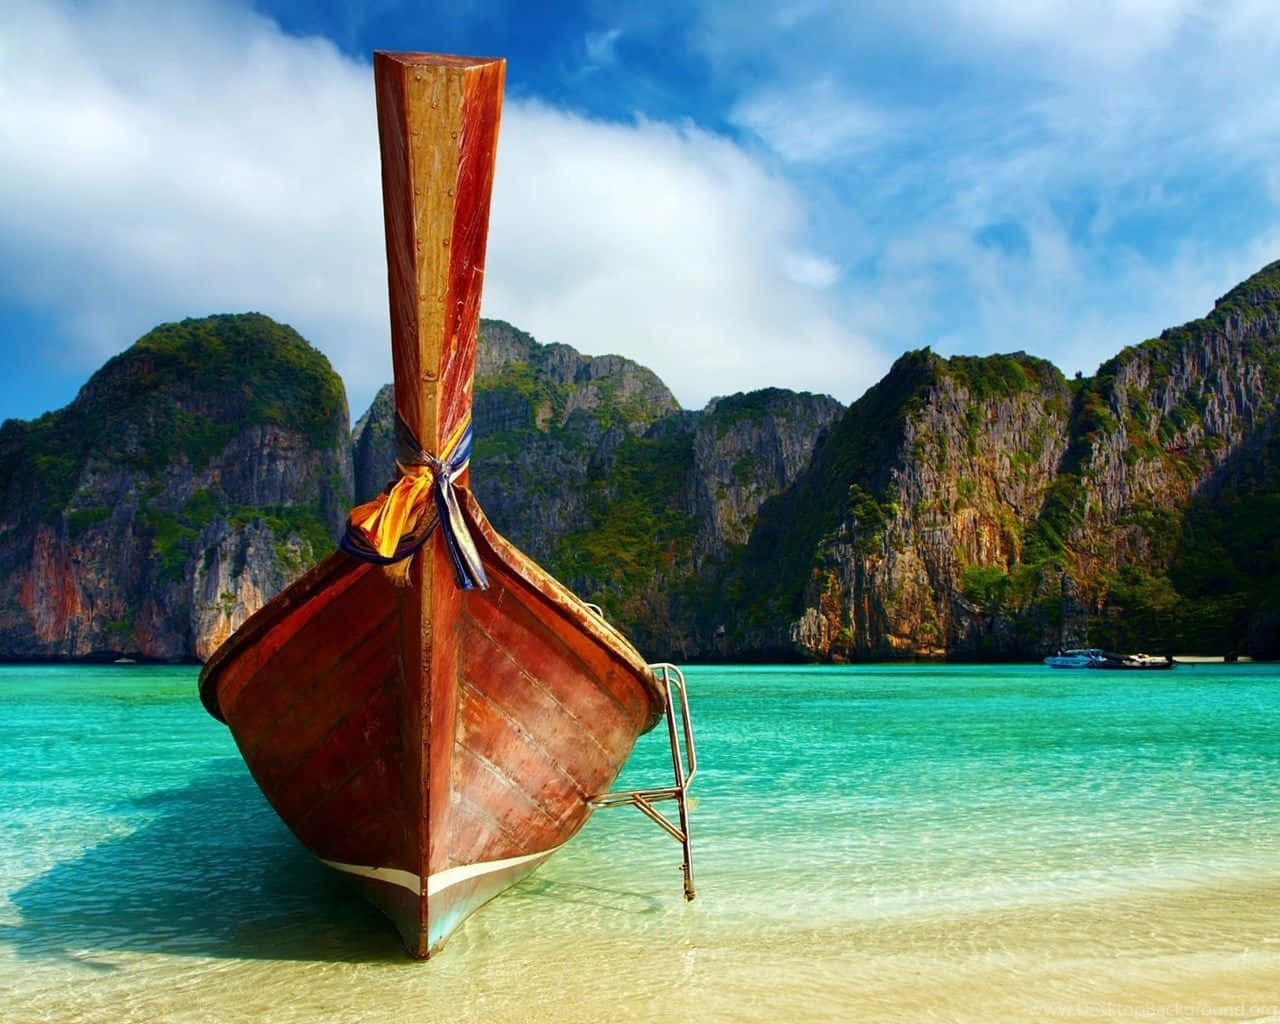 Magnificent view of the Gulf of Thailand